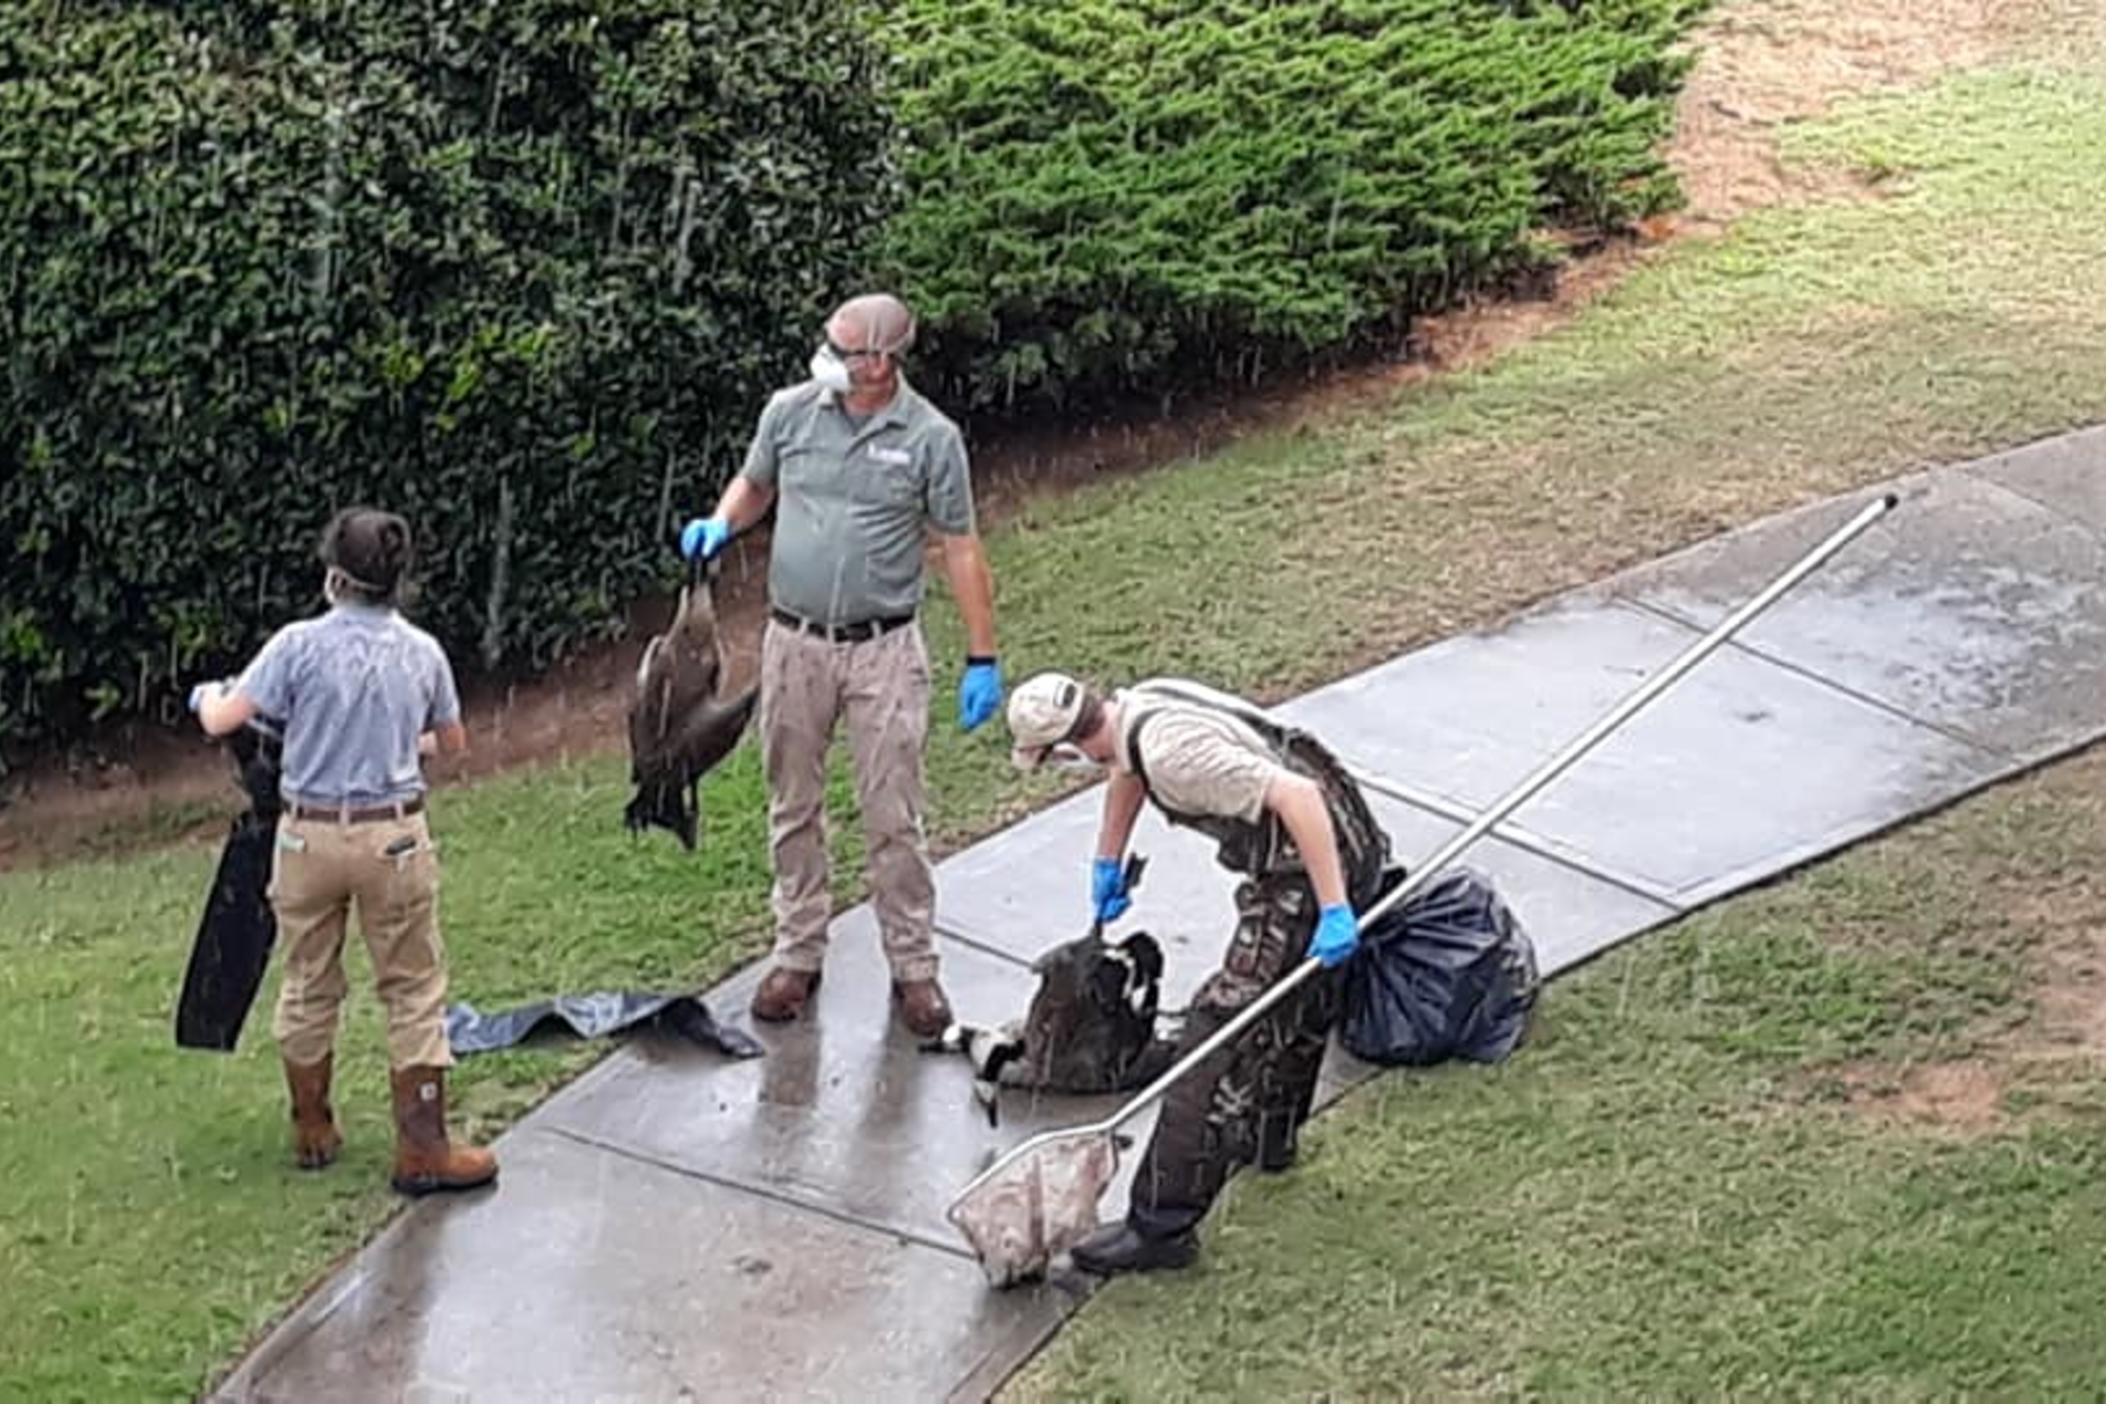 Amanda Seamon photographed Department of Natural Resources removing dead geese found around her complex last Wednesday.